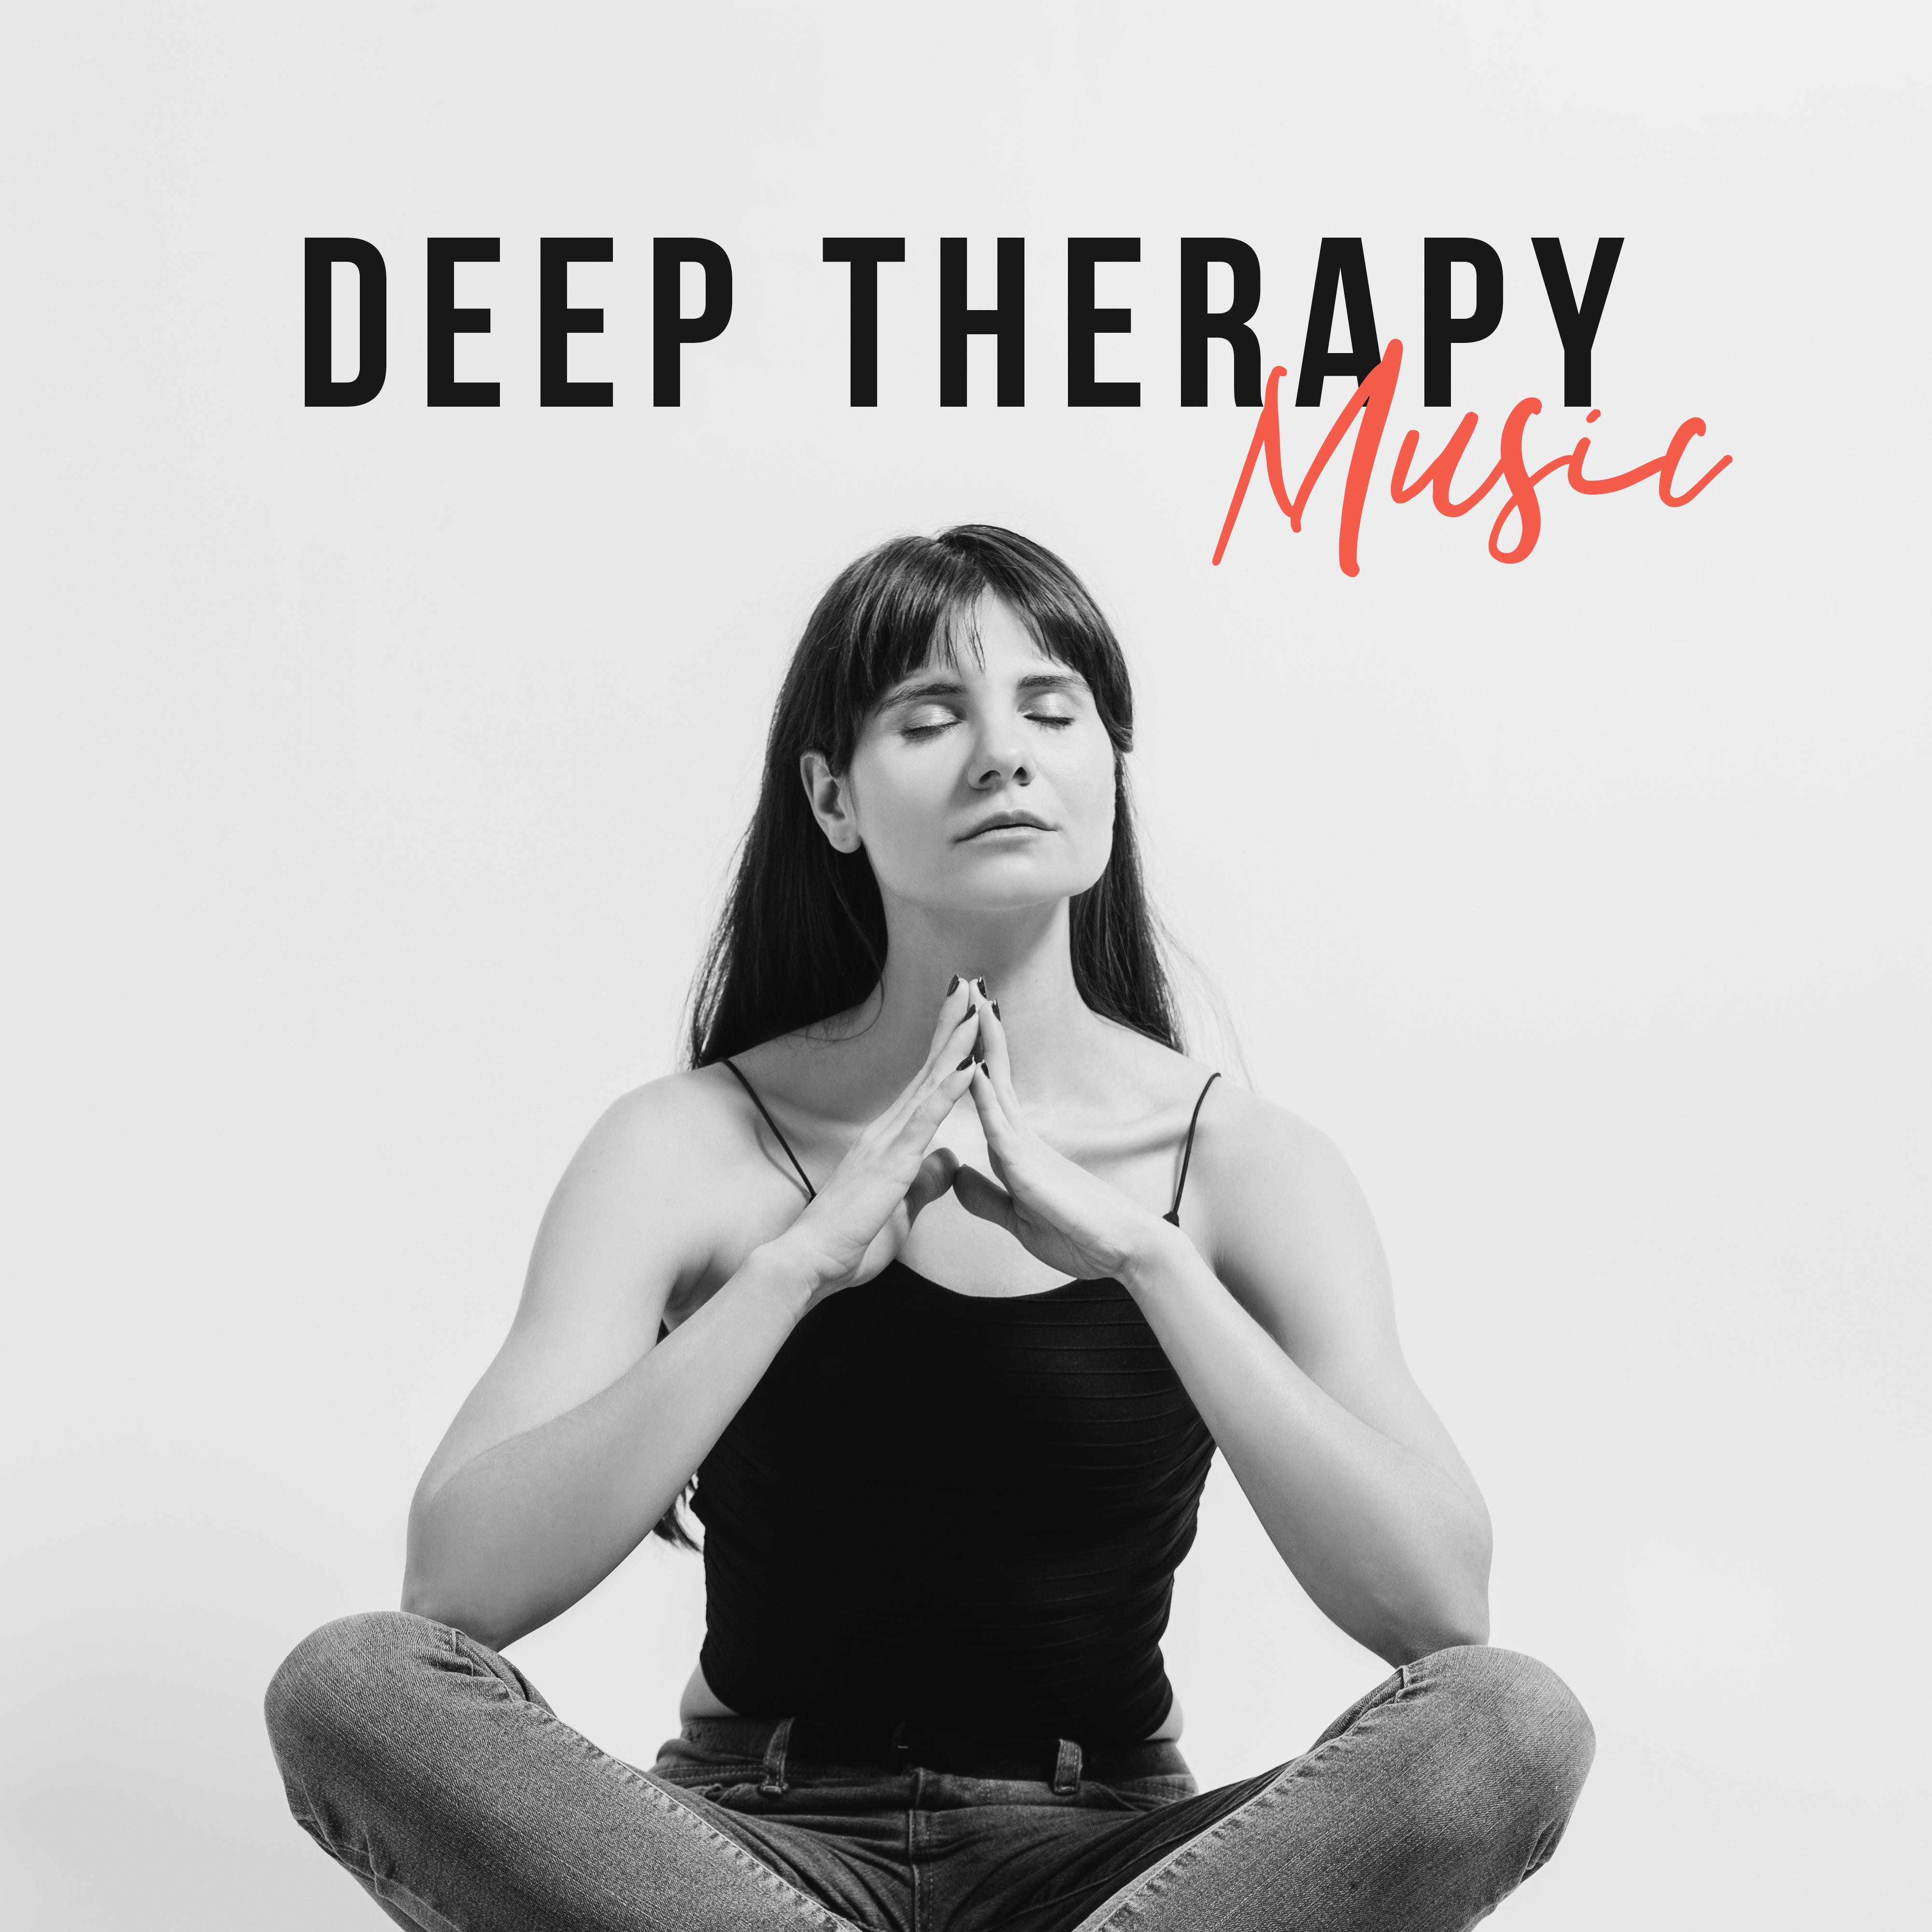 Deep Therapy Music – Soothing Sounds for Deep Meditation, Yoga Training, Chakra Collection 2019, Inner Bliss, Calm Down, Meditation Music Zone, Relaxing Yoga, Reiki